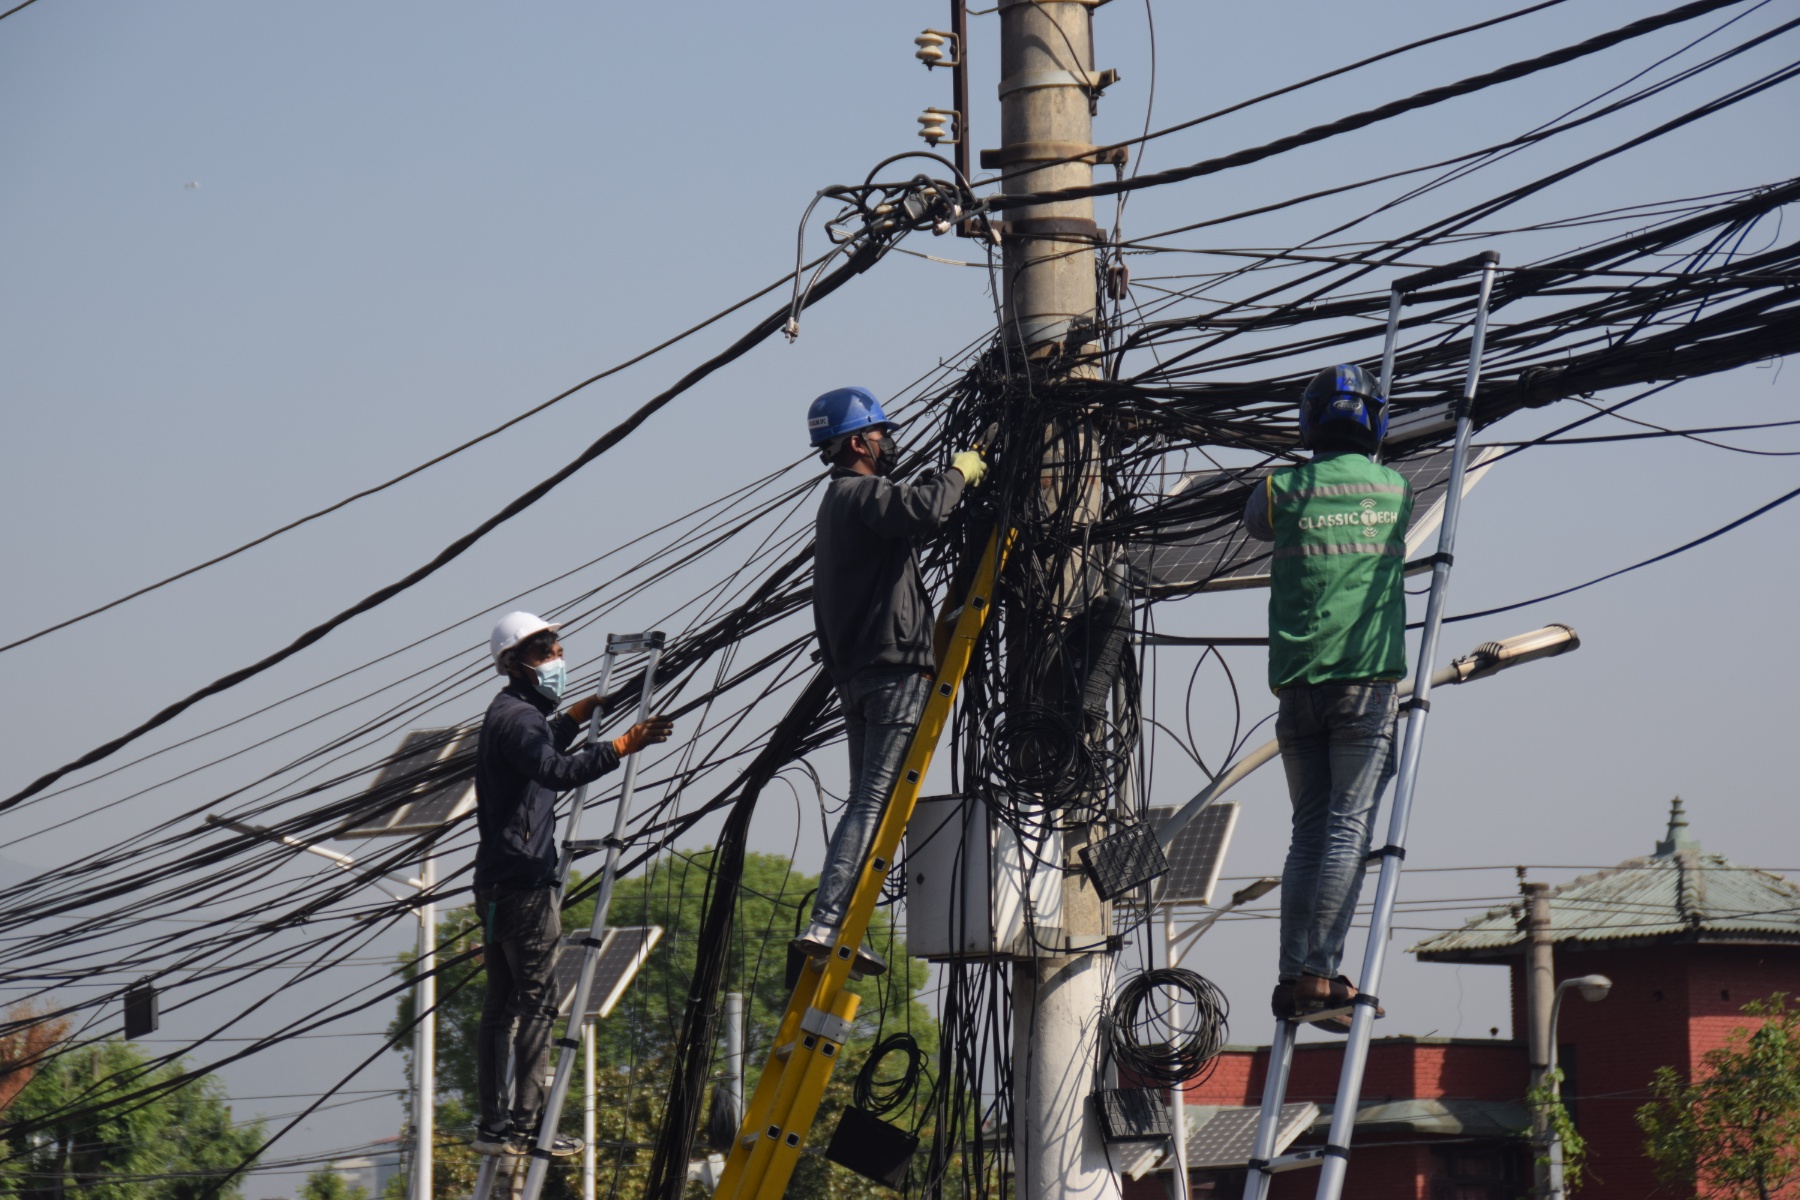 In Pictures: Kathmandu metropolis starts removing haphazardly placed internet, cable TV wire from city areas